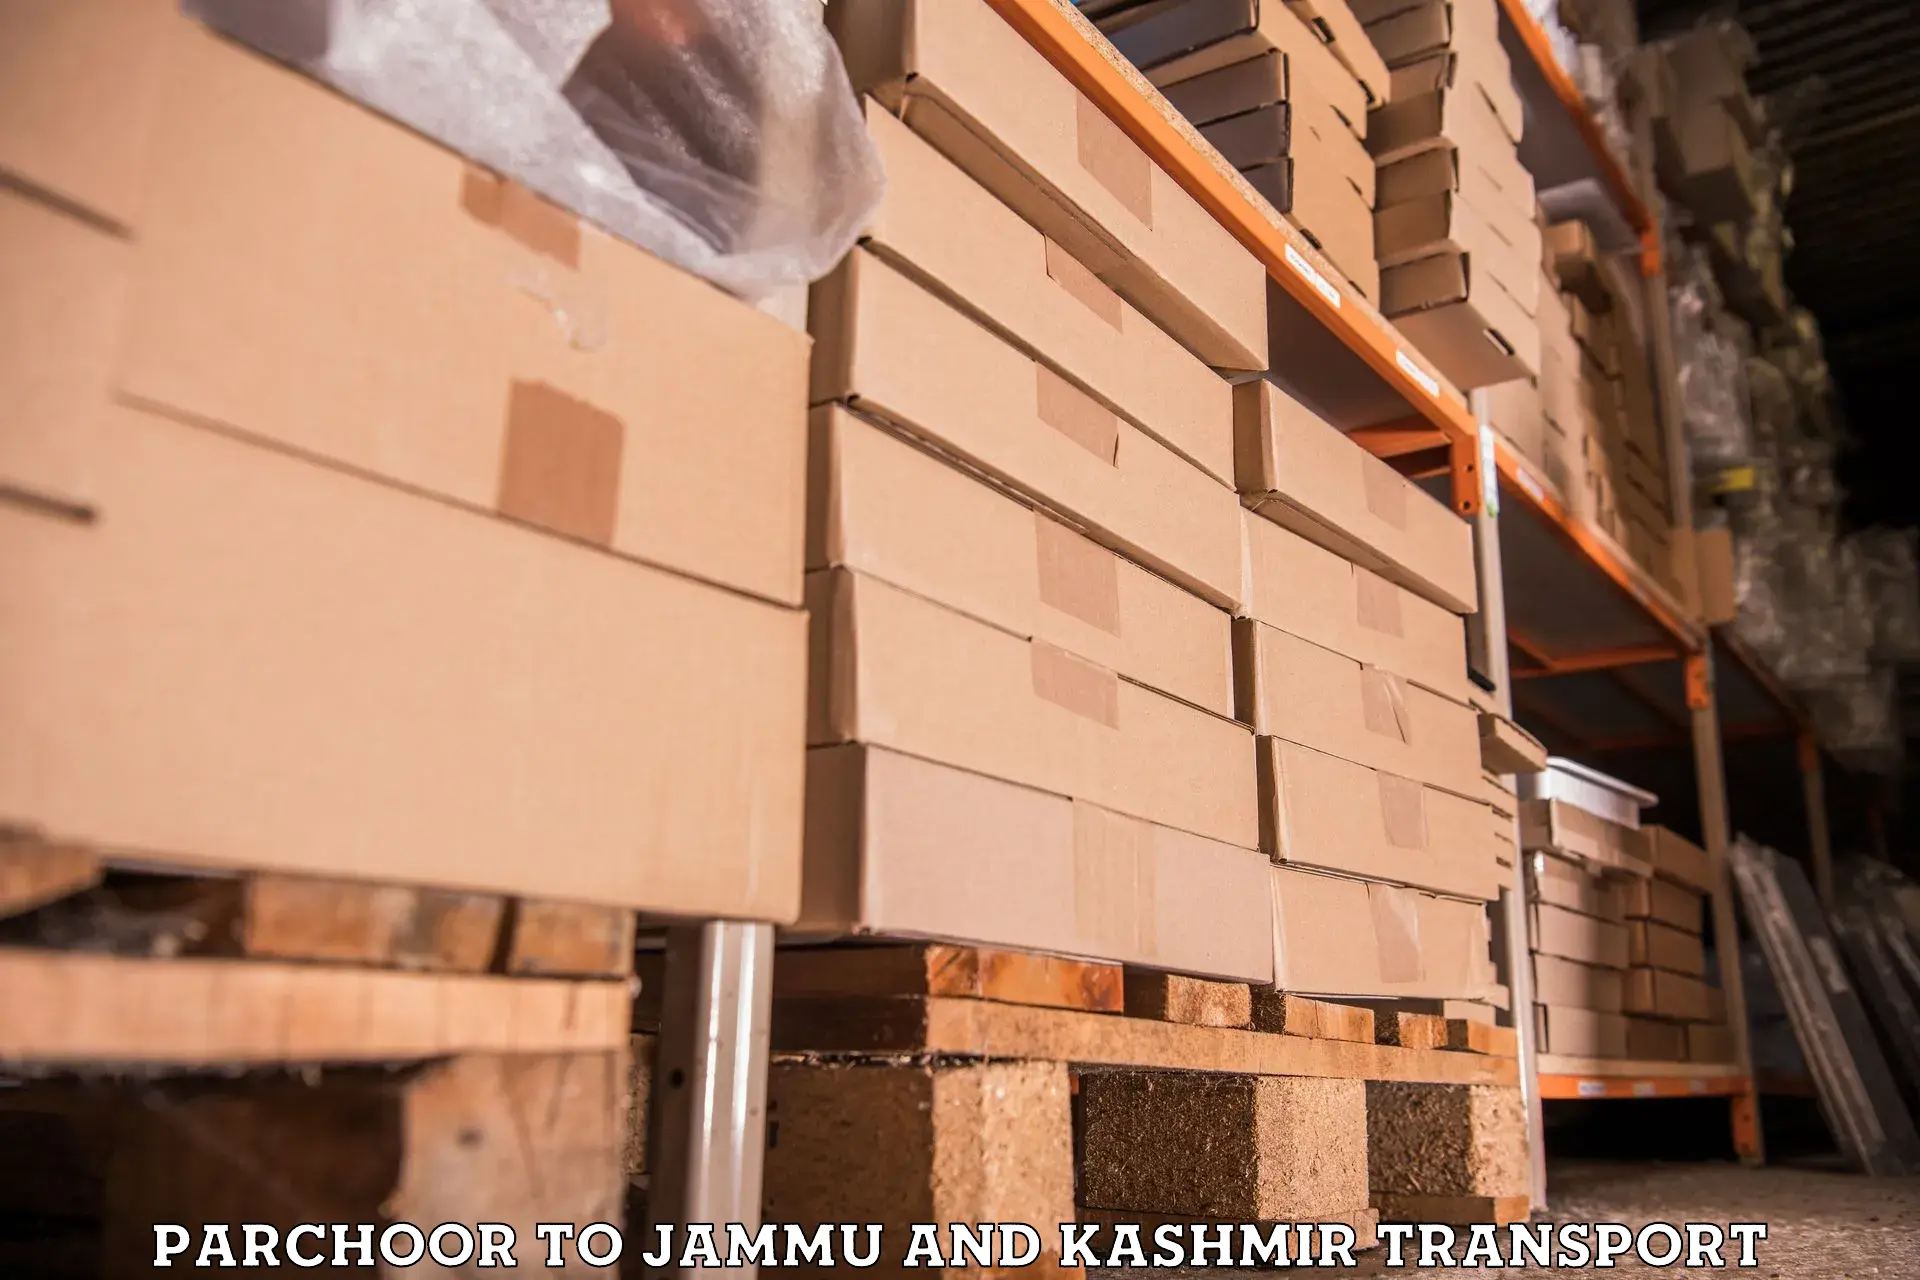 Container transport service in Parchoor to Jammu and Kashmir